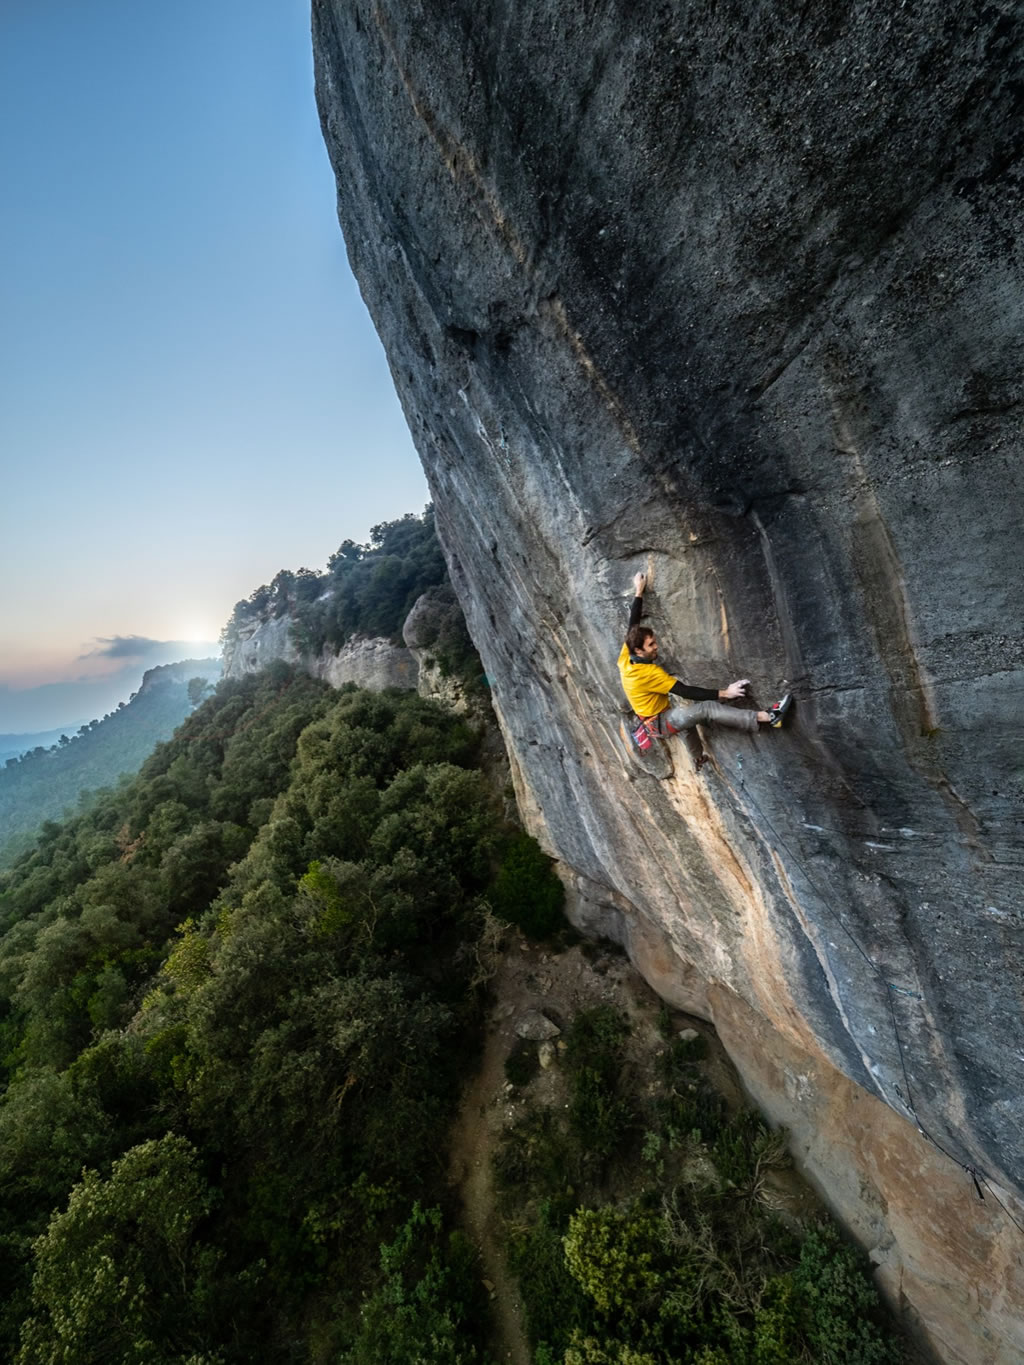 climber Chris Sharma grips a vertical rock wall with little overhang in a landscape with trees and sky